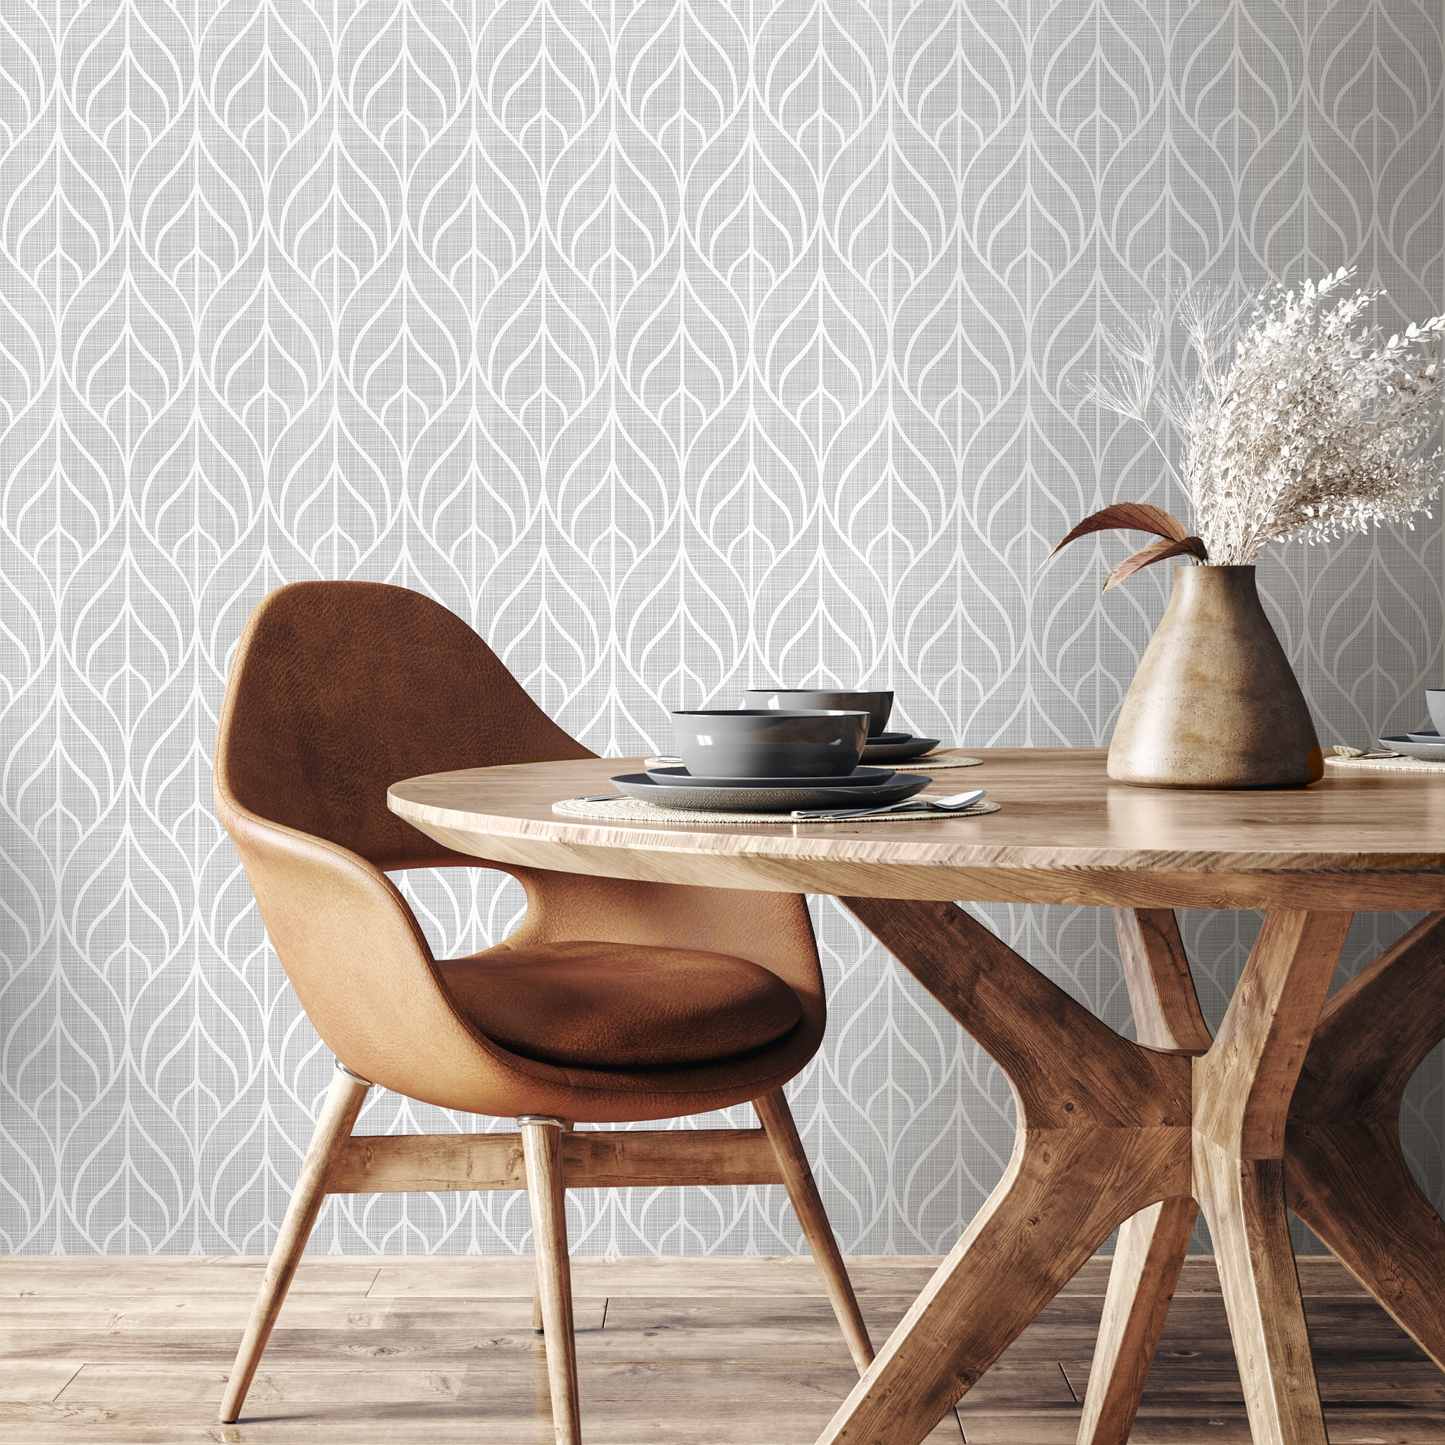 Removable Wallpaper Peel and Stick Wallpaper Wall Paper Wall Mural - Geometric Gray Wallpaper - A553